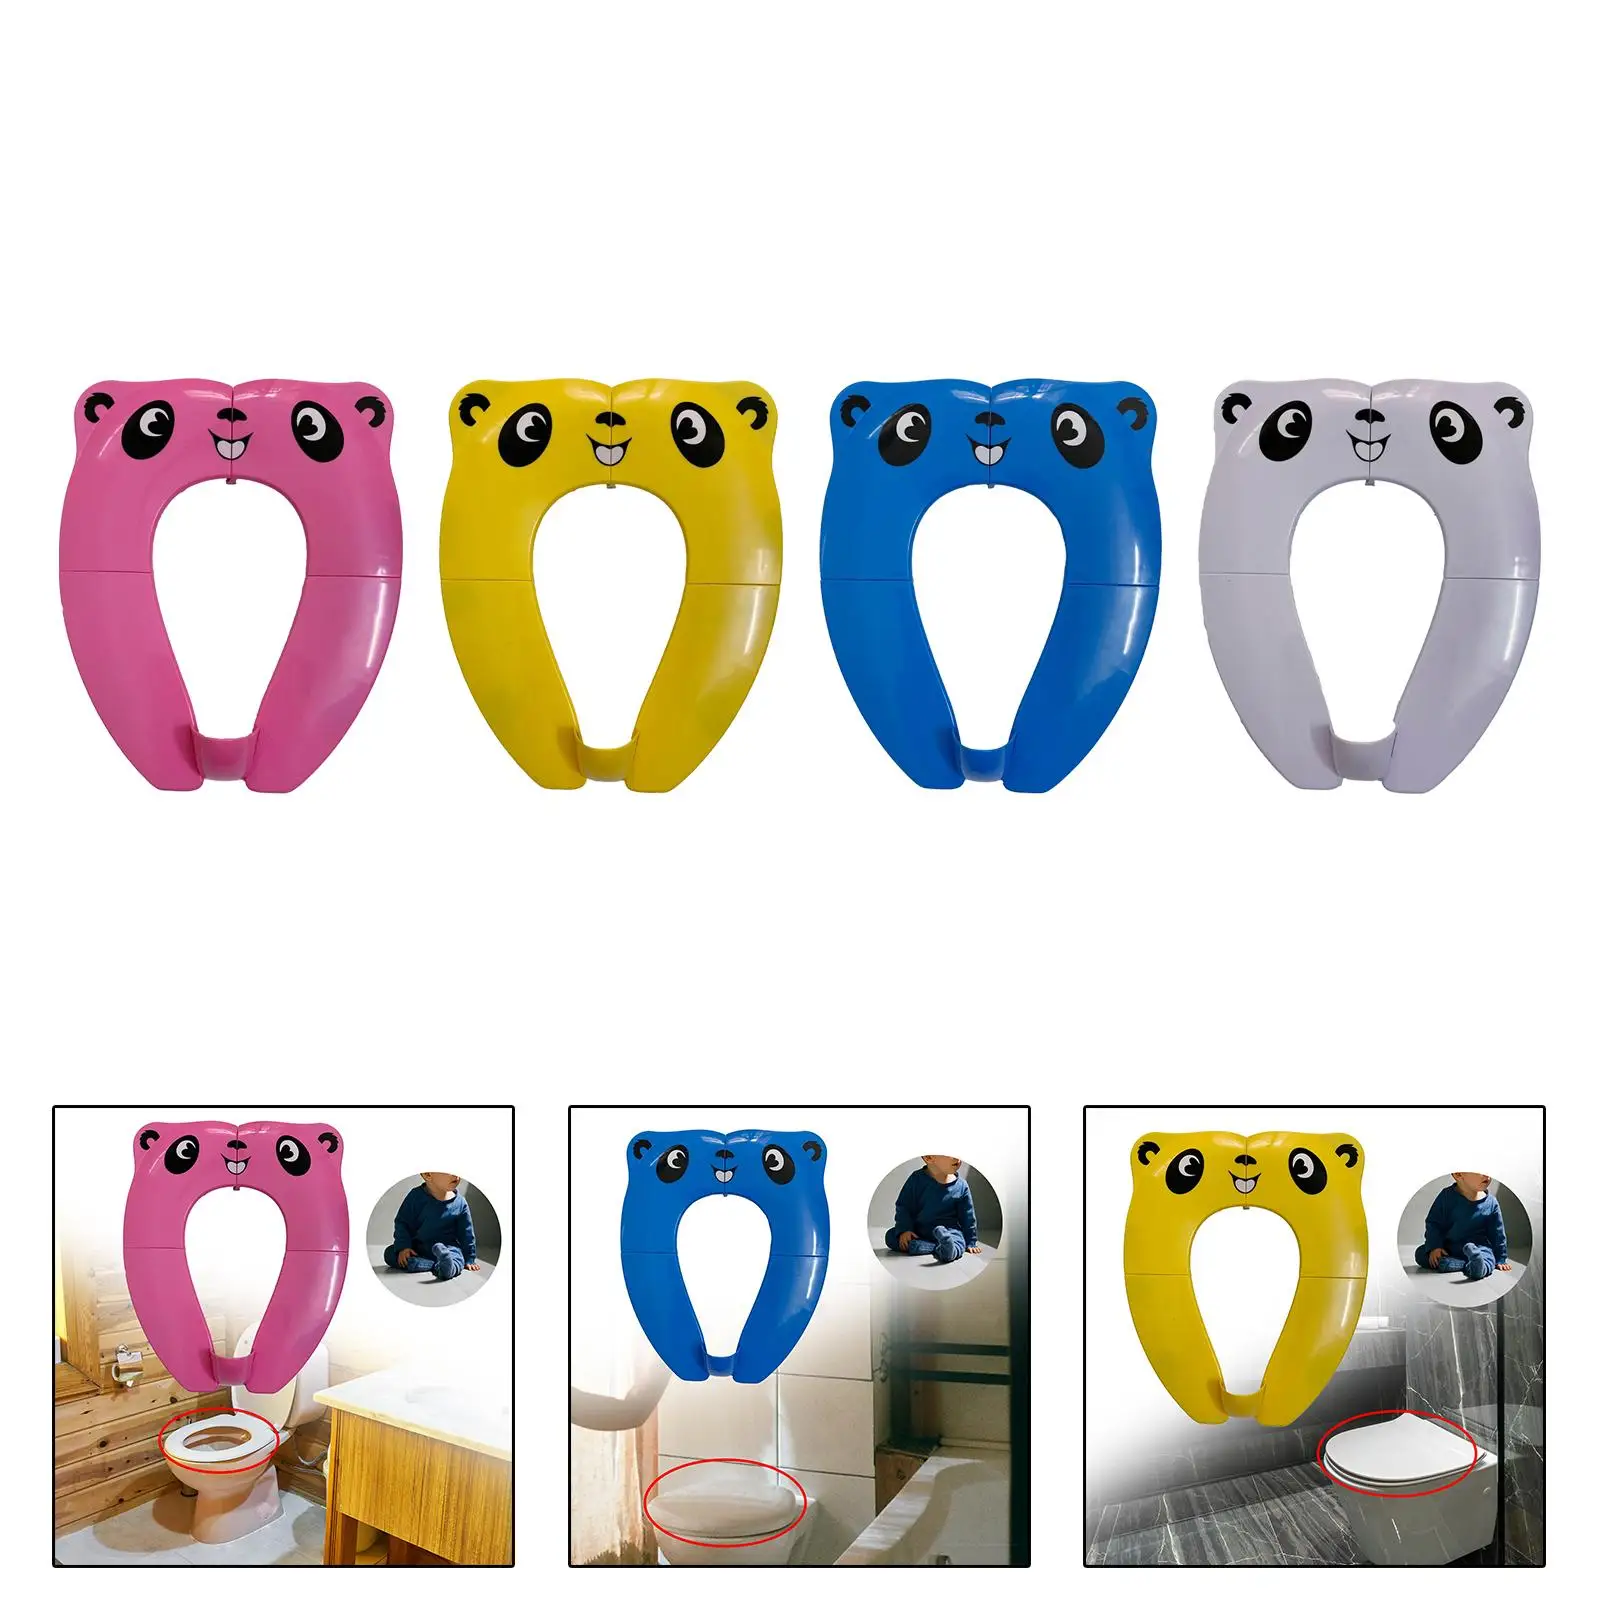 Folding Travel Potty Seat, Toilet Pad with Guard, Potty Seat Cover Cushion